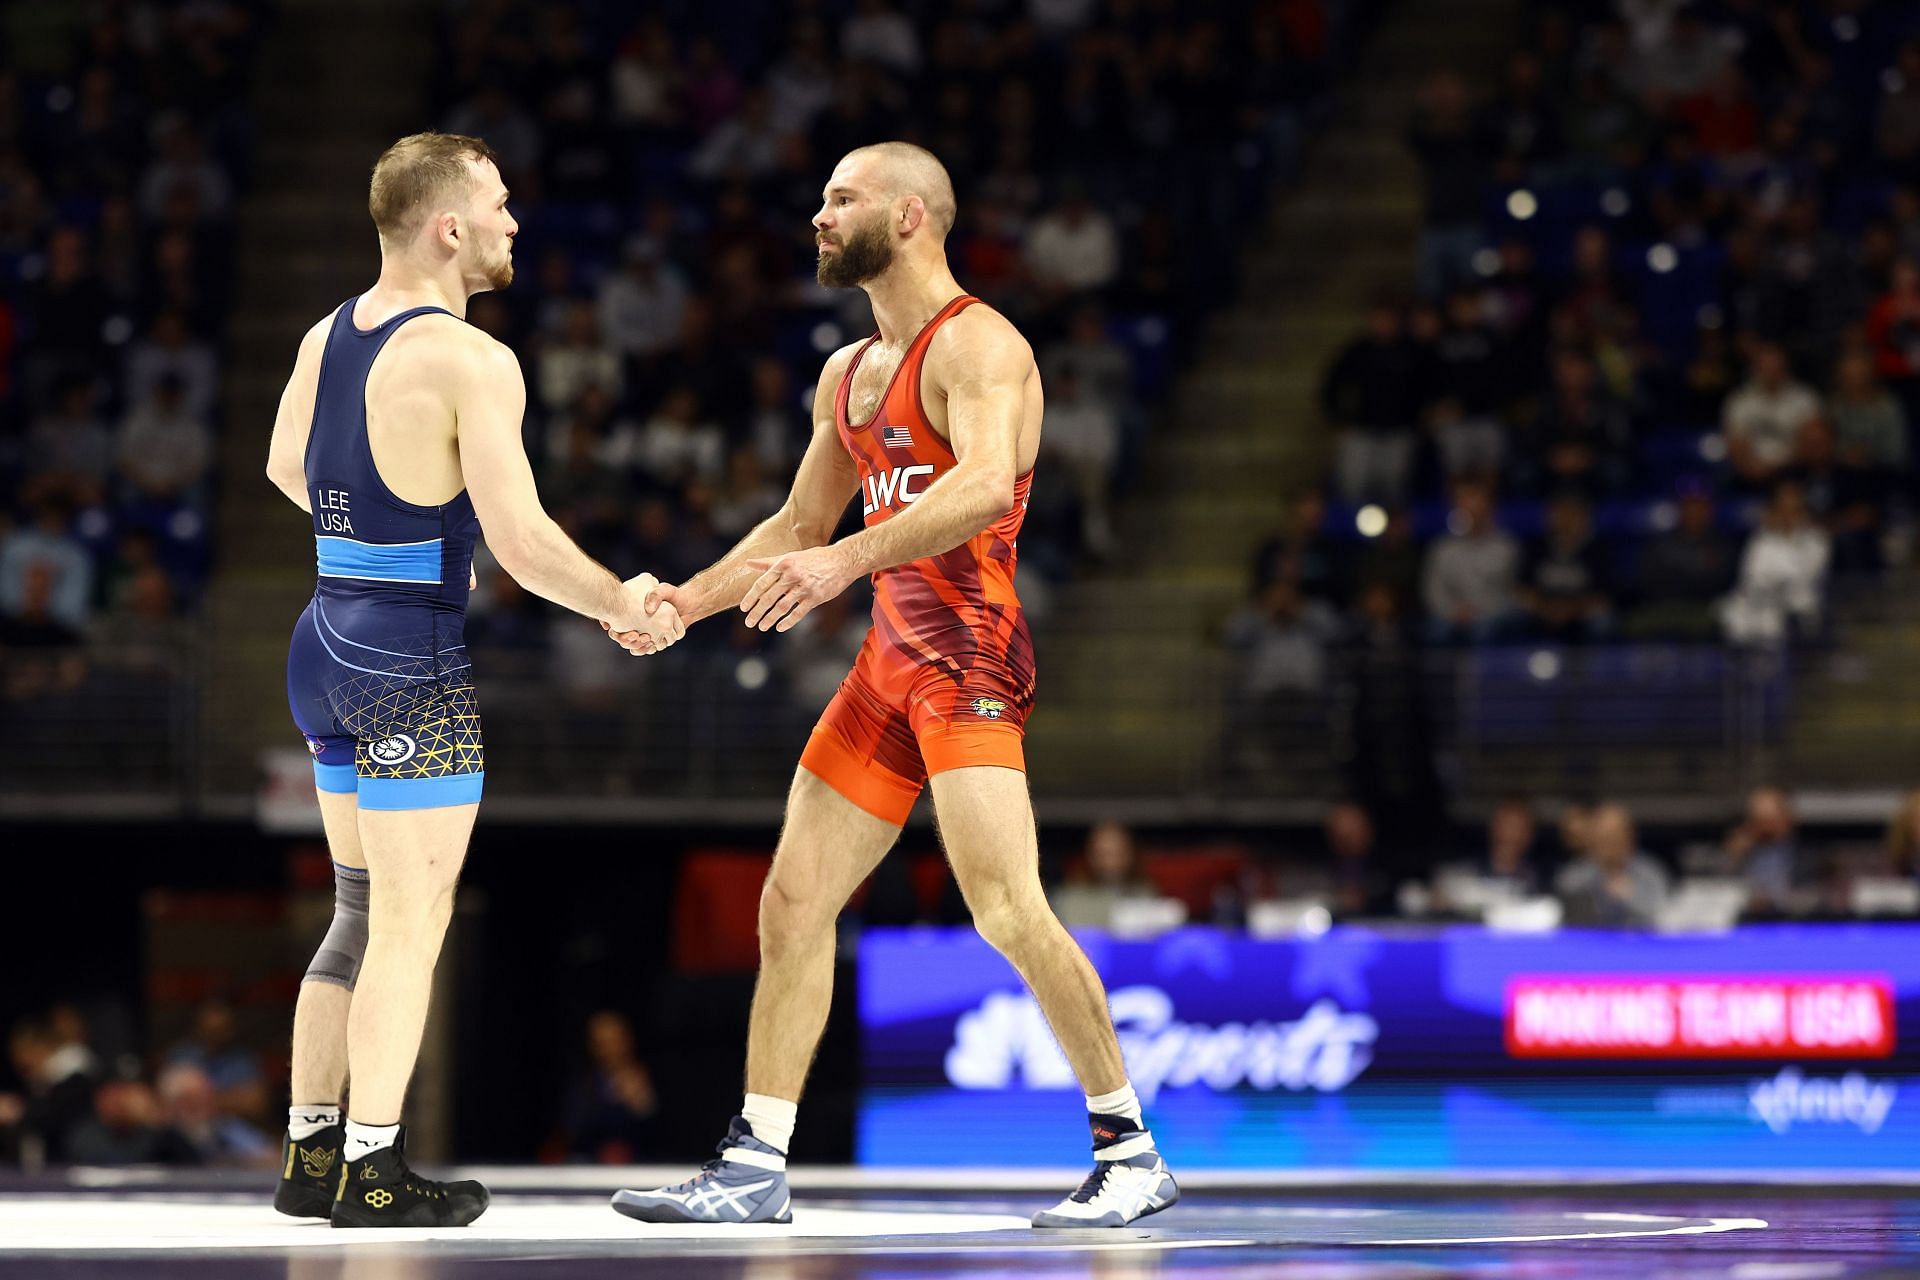 Spencer Lee (left) and Thomas Gilman at the 2024 US Olympic Wrestling Trials